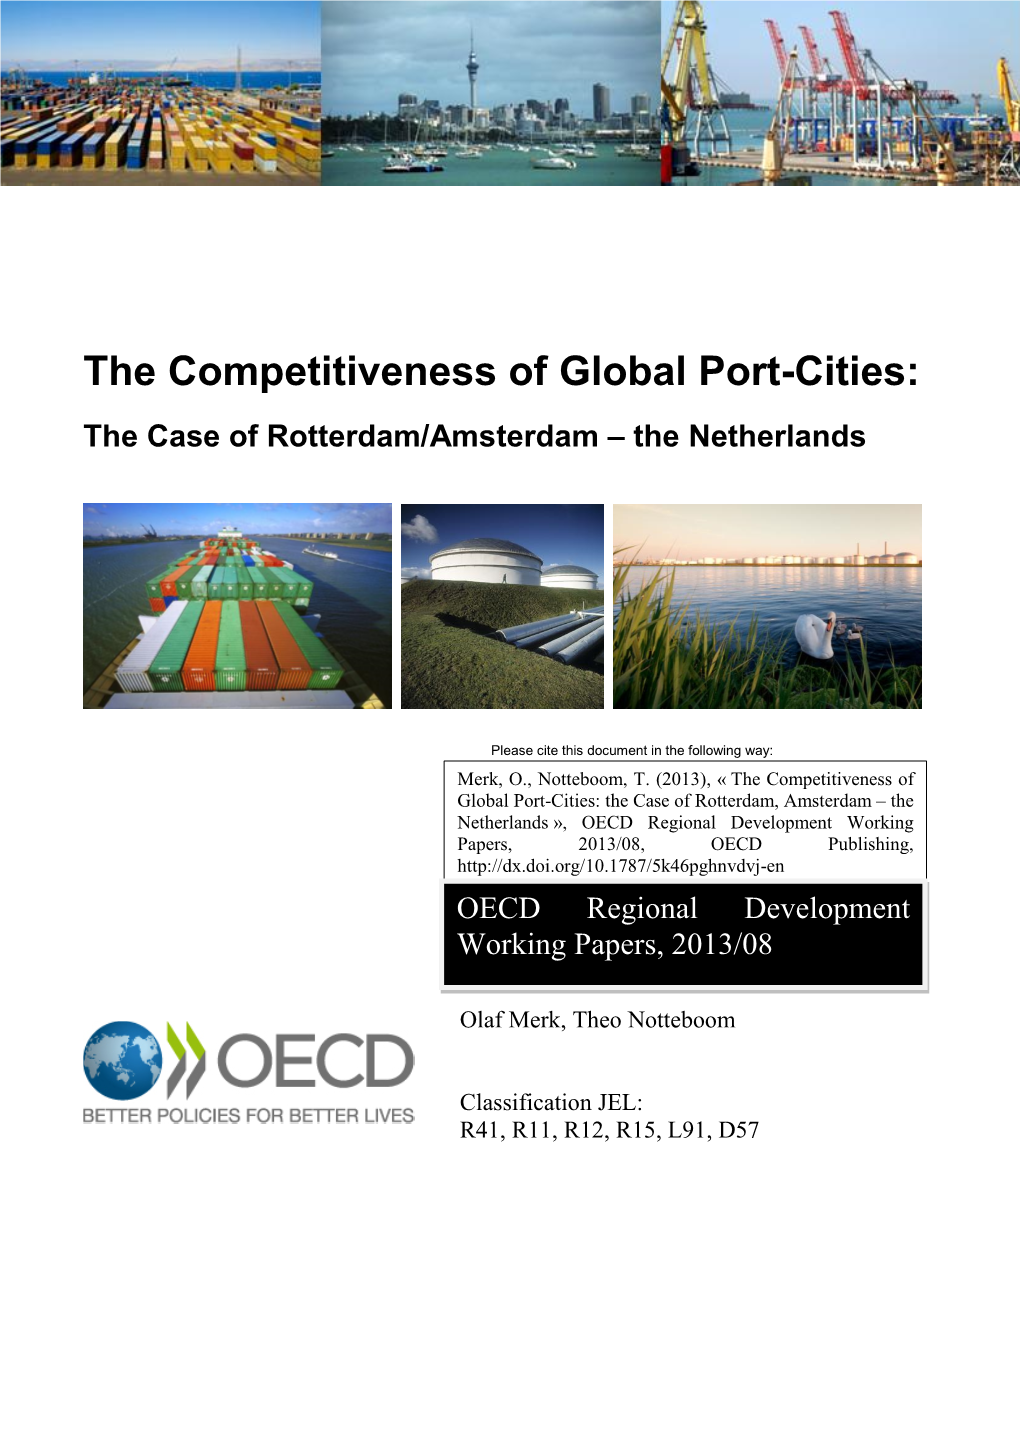 The Competitiveness of Global Port-Cities: the Case of Rotterdam/Amsterdam – the Netherlands